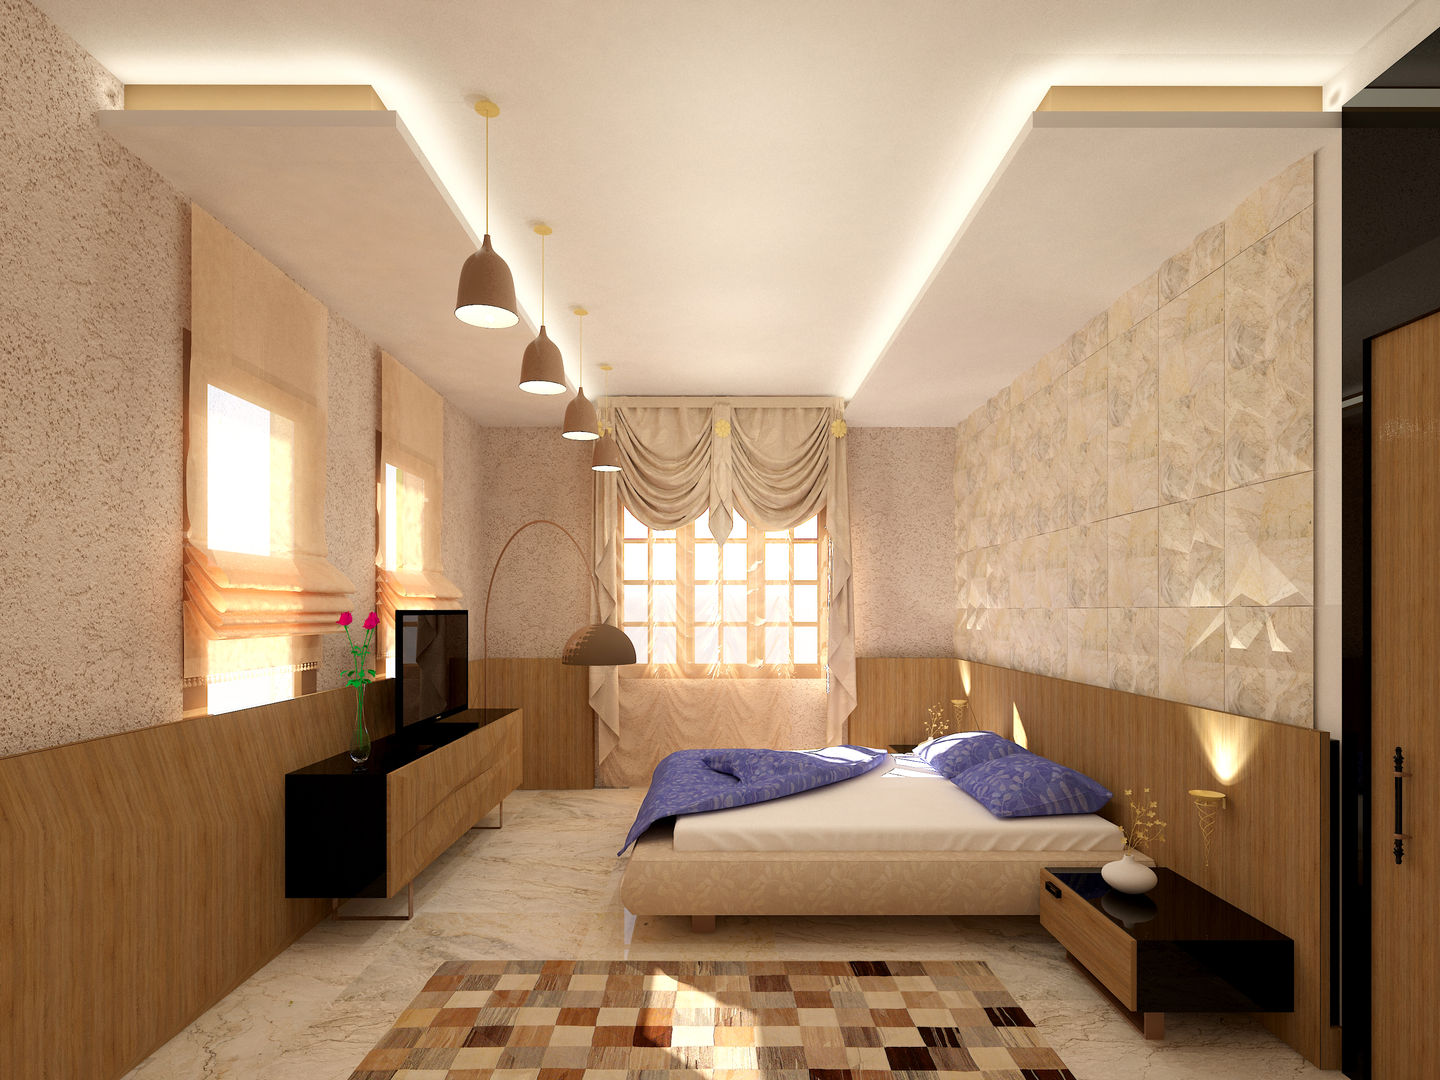 Interior shot SPACES Architects Planners Engineers Mediterranean style bedroom